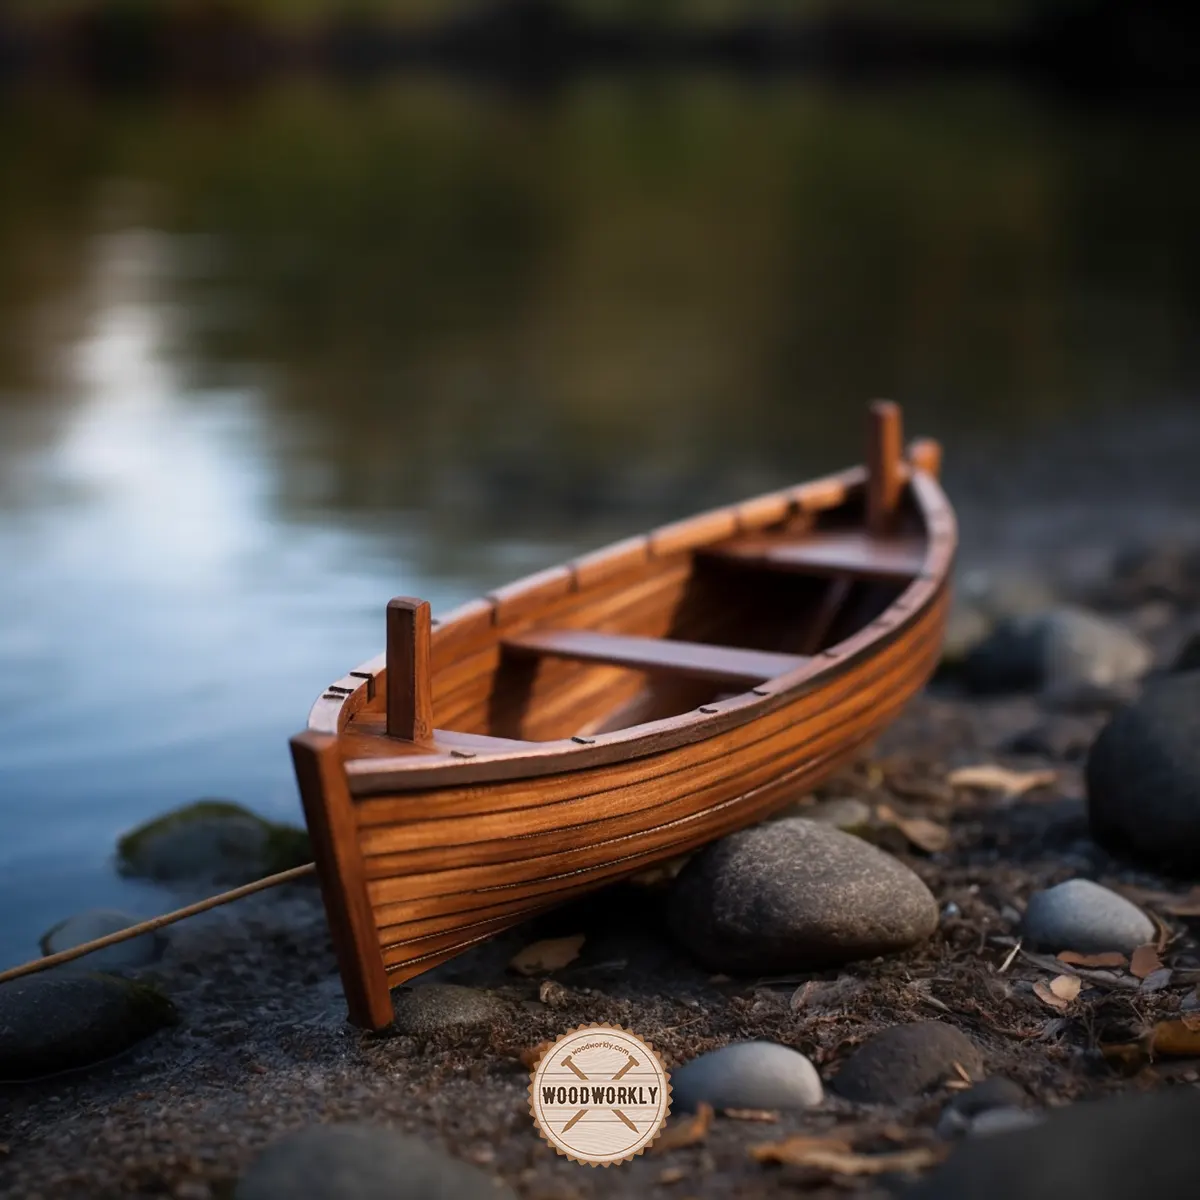 Boat made with bent wood pieces